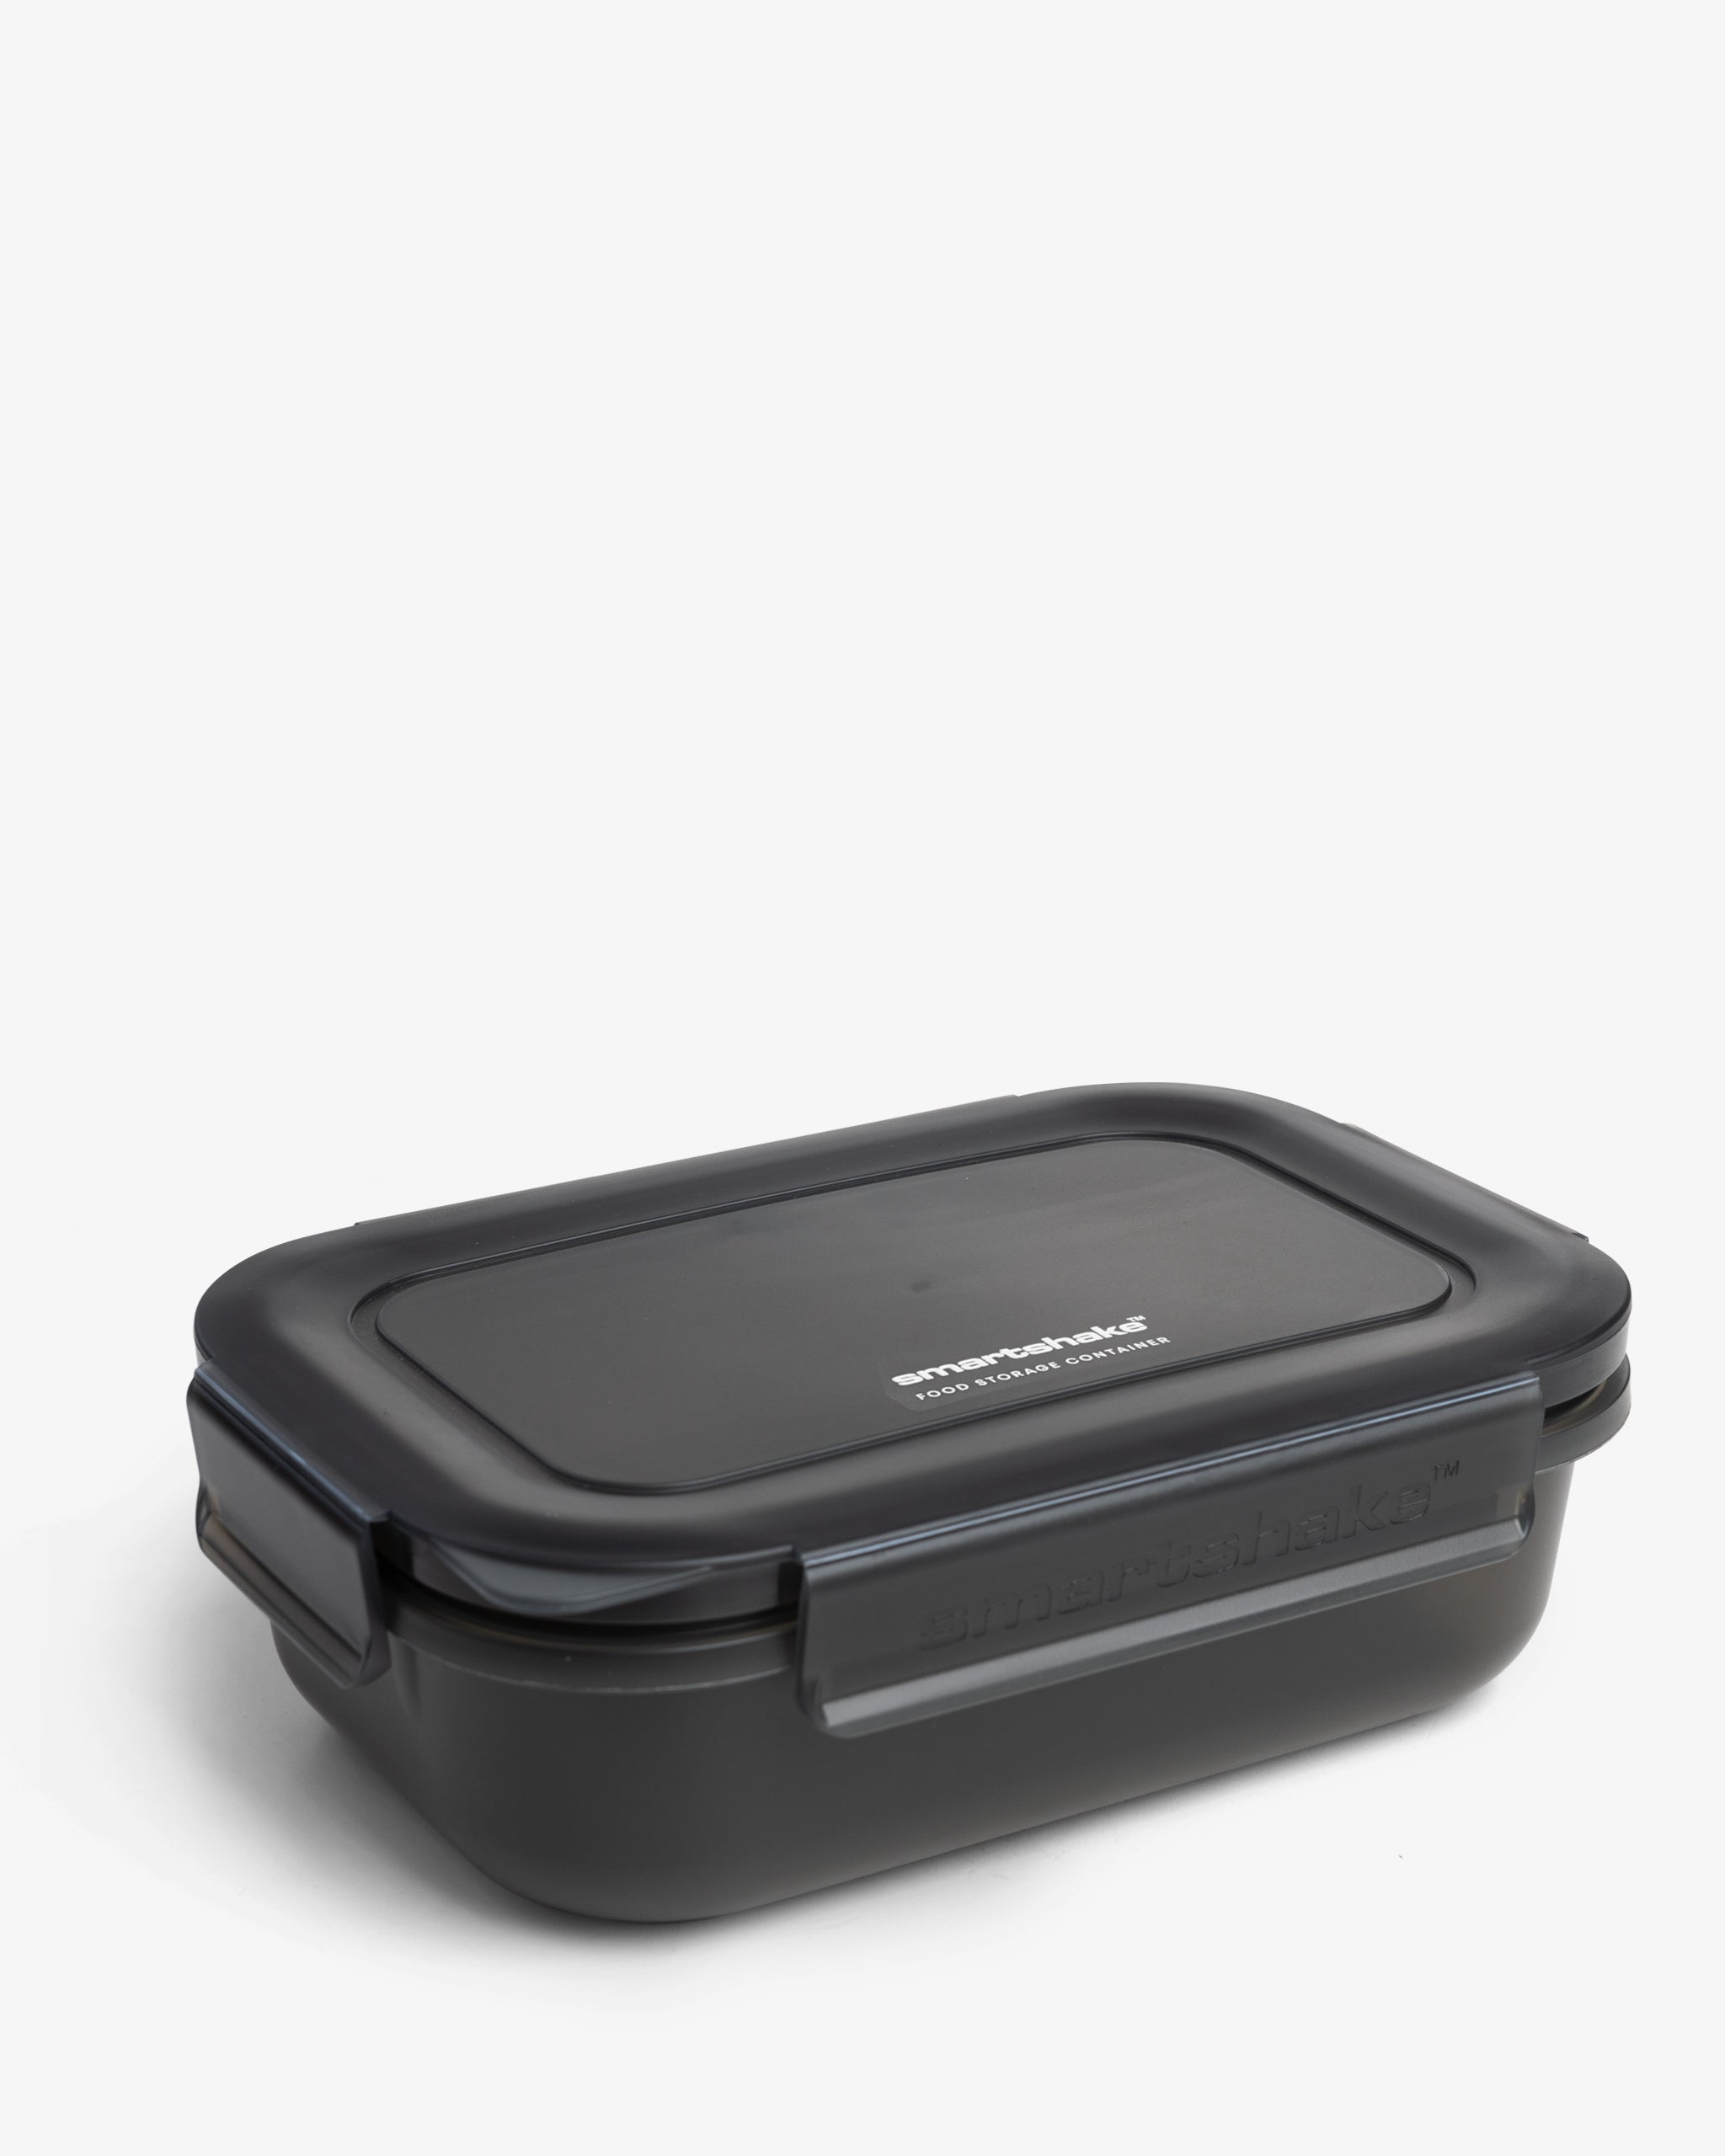 Silicone Lunch Box, Portable Silicone Food Container, 500/800